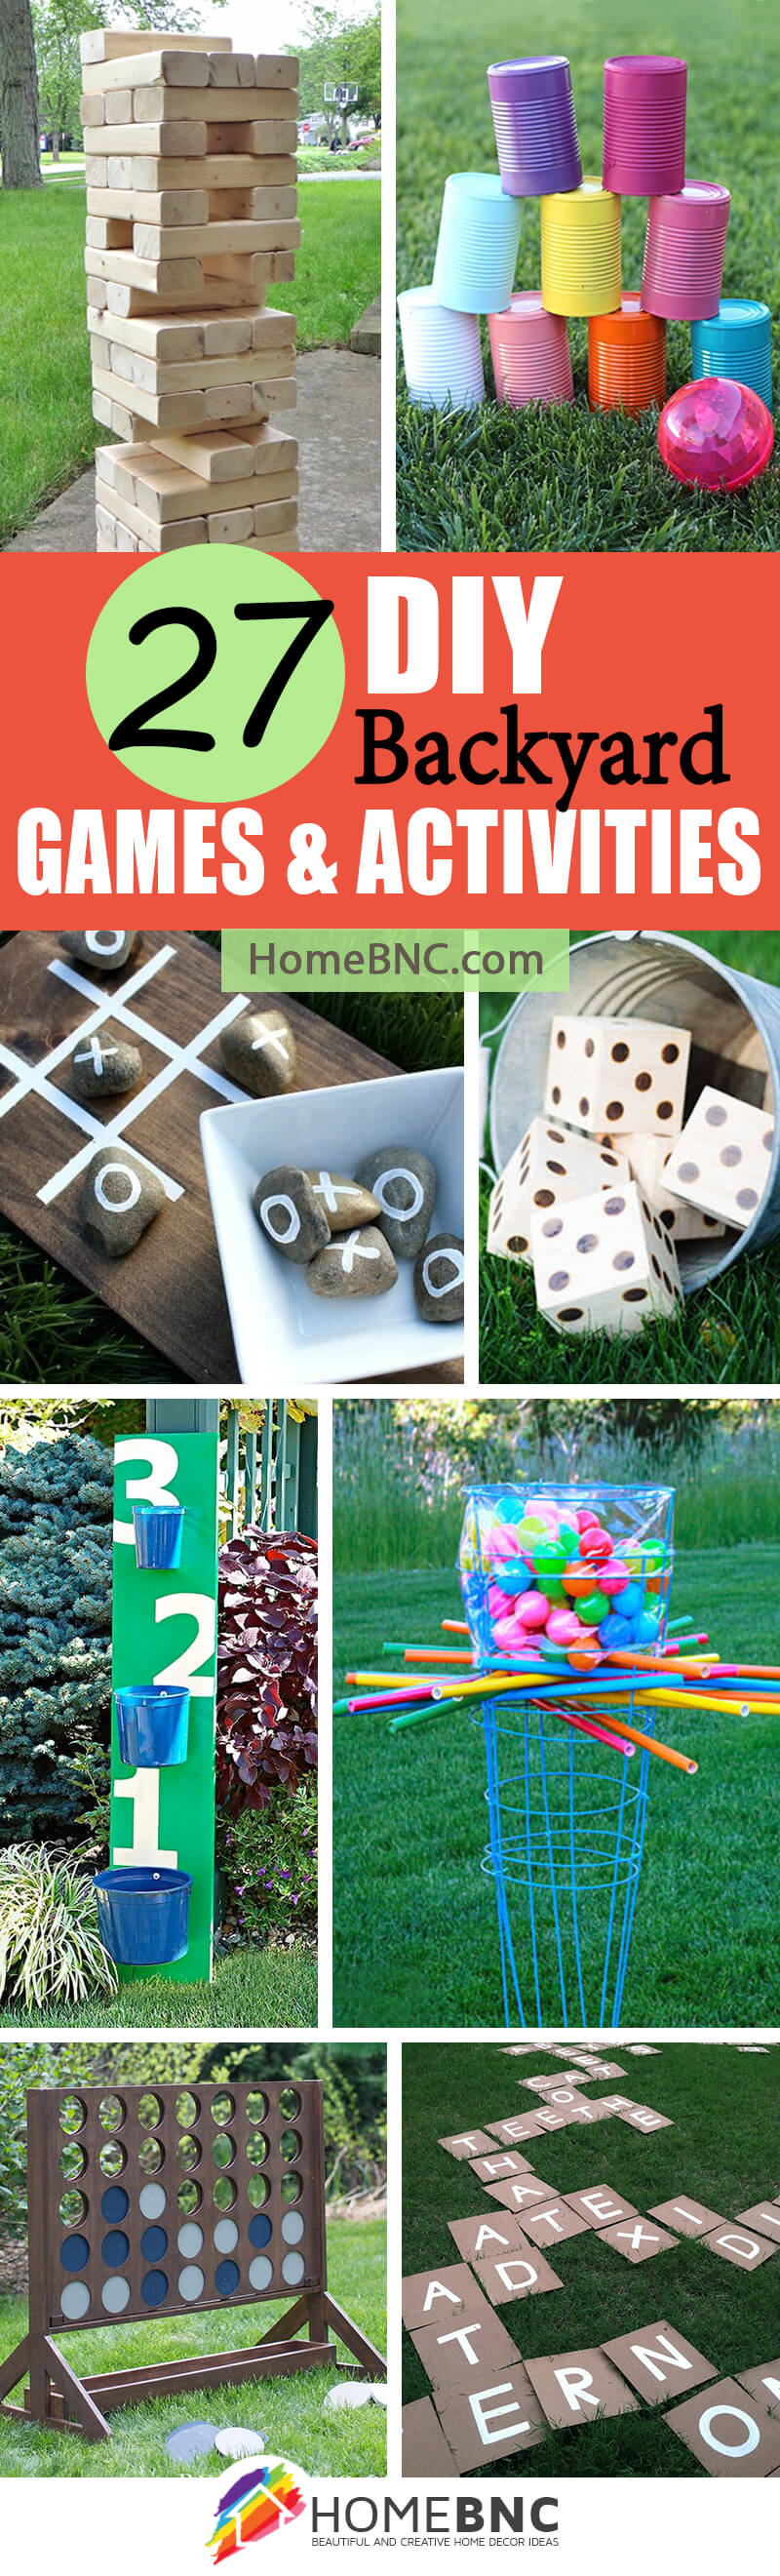 27 Best Diy Backyard Games Ideas And Designs For 2020